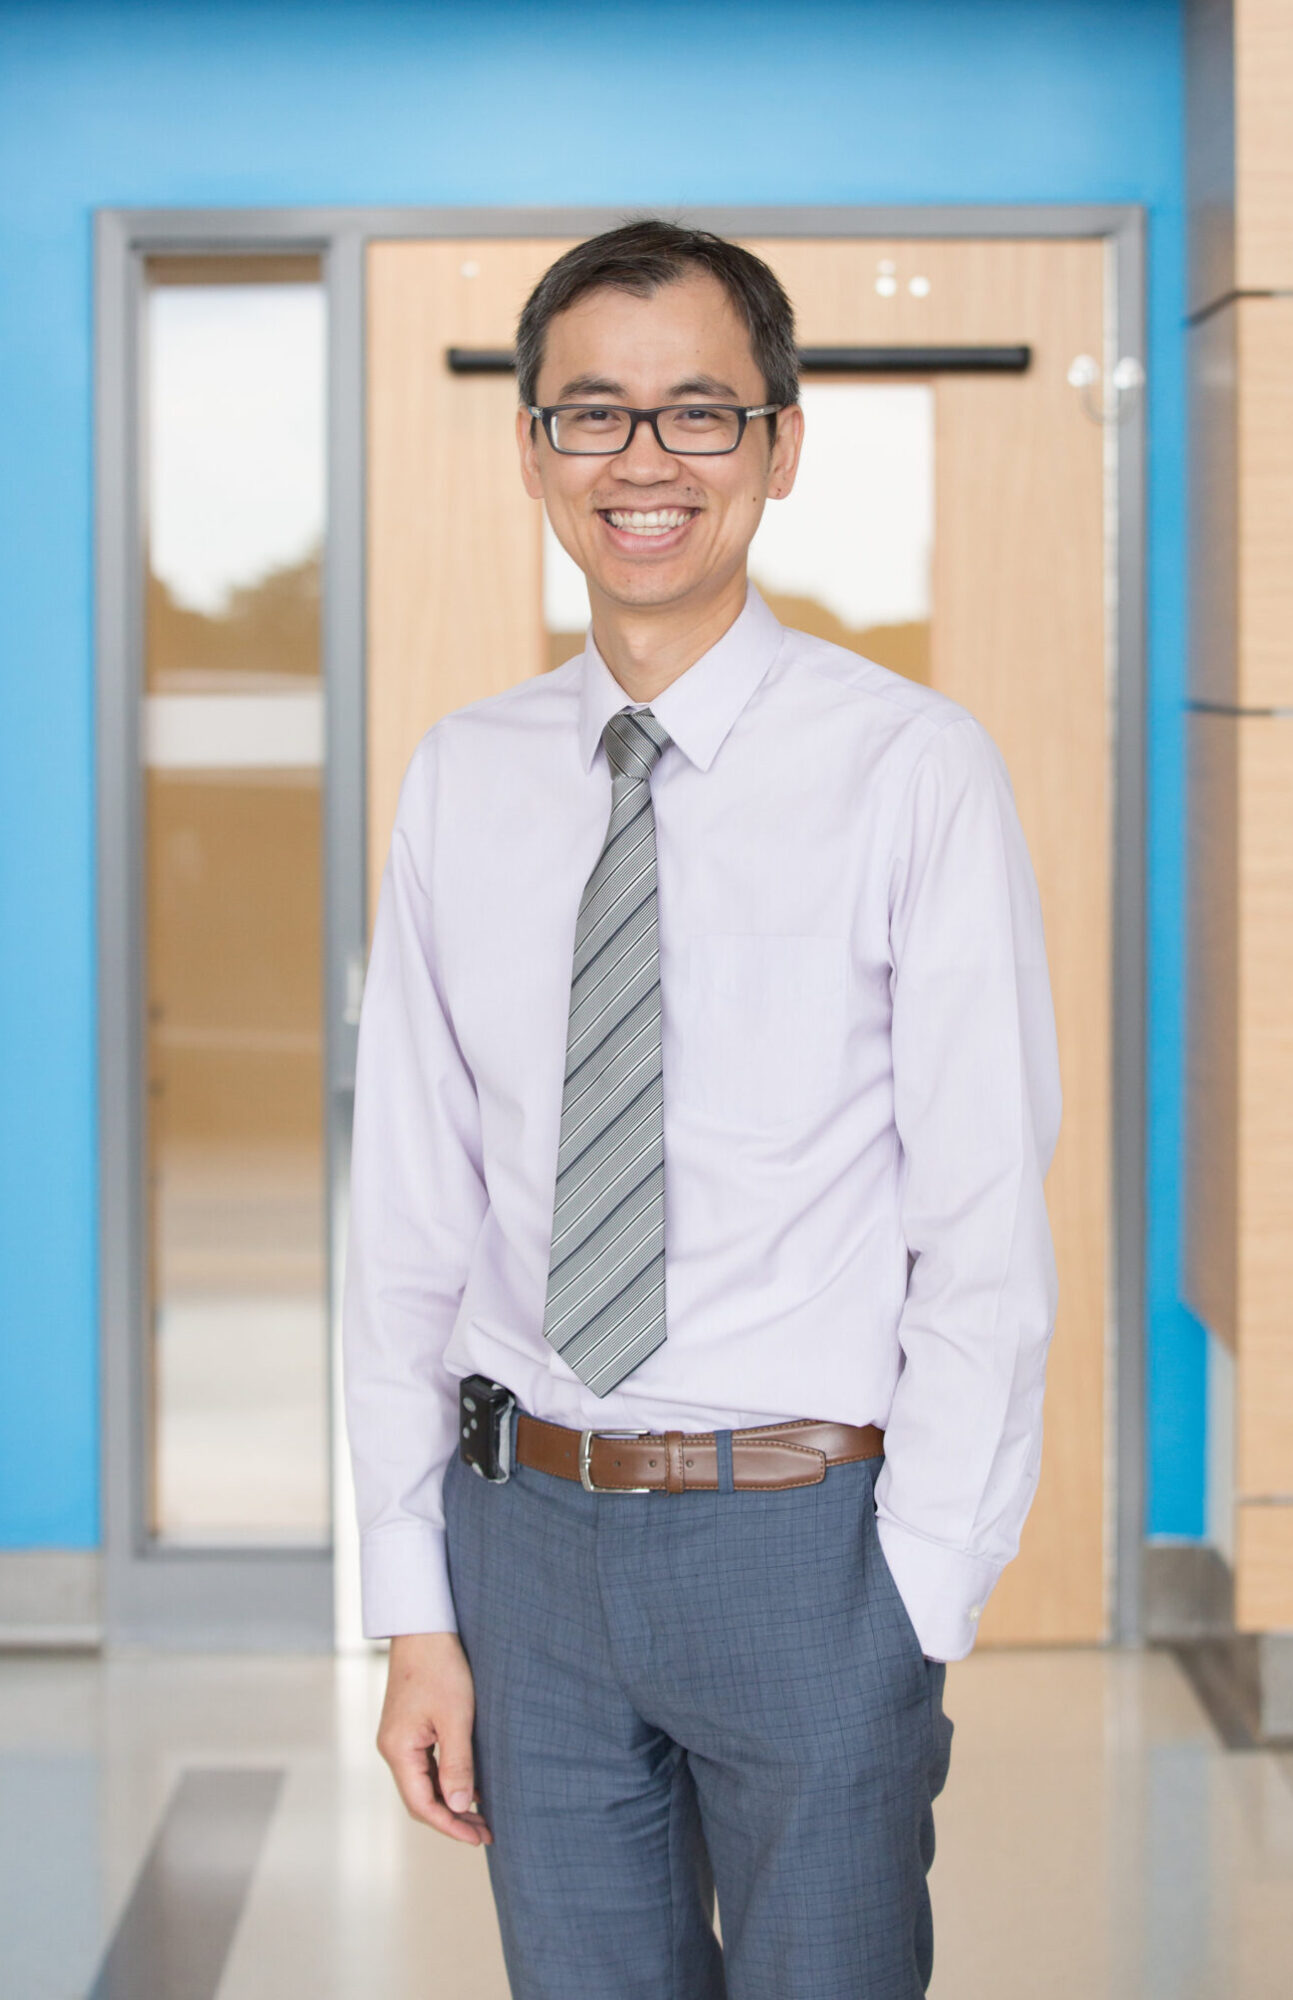 Dr. Quoc Huynh